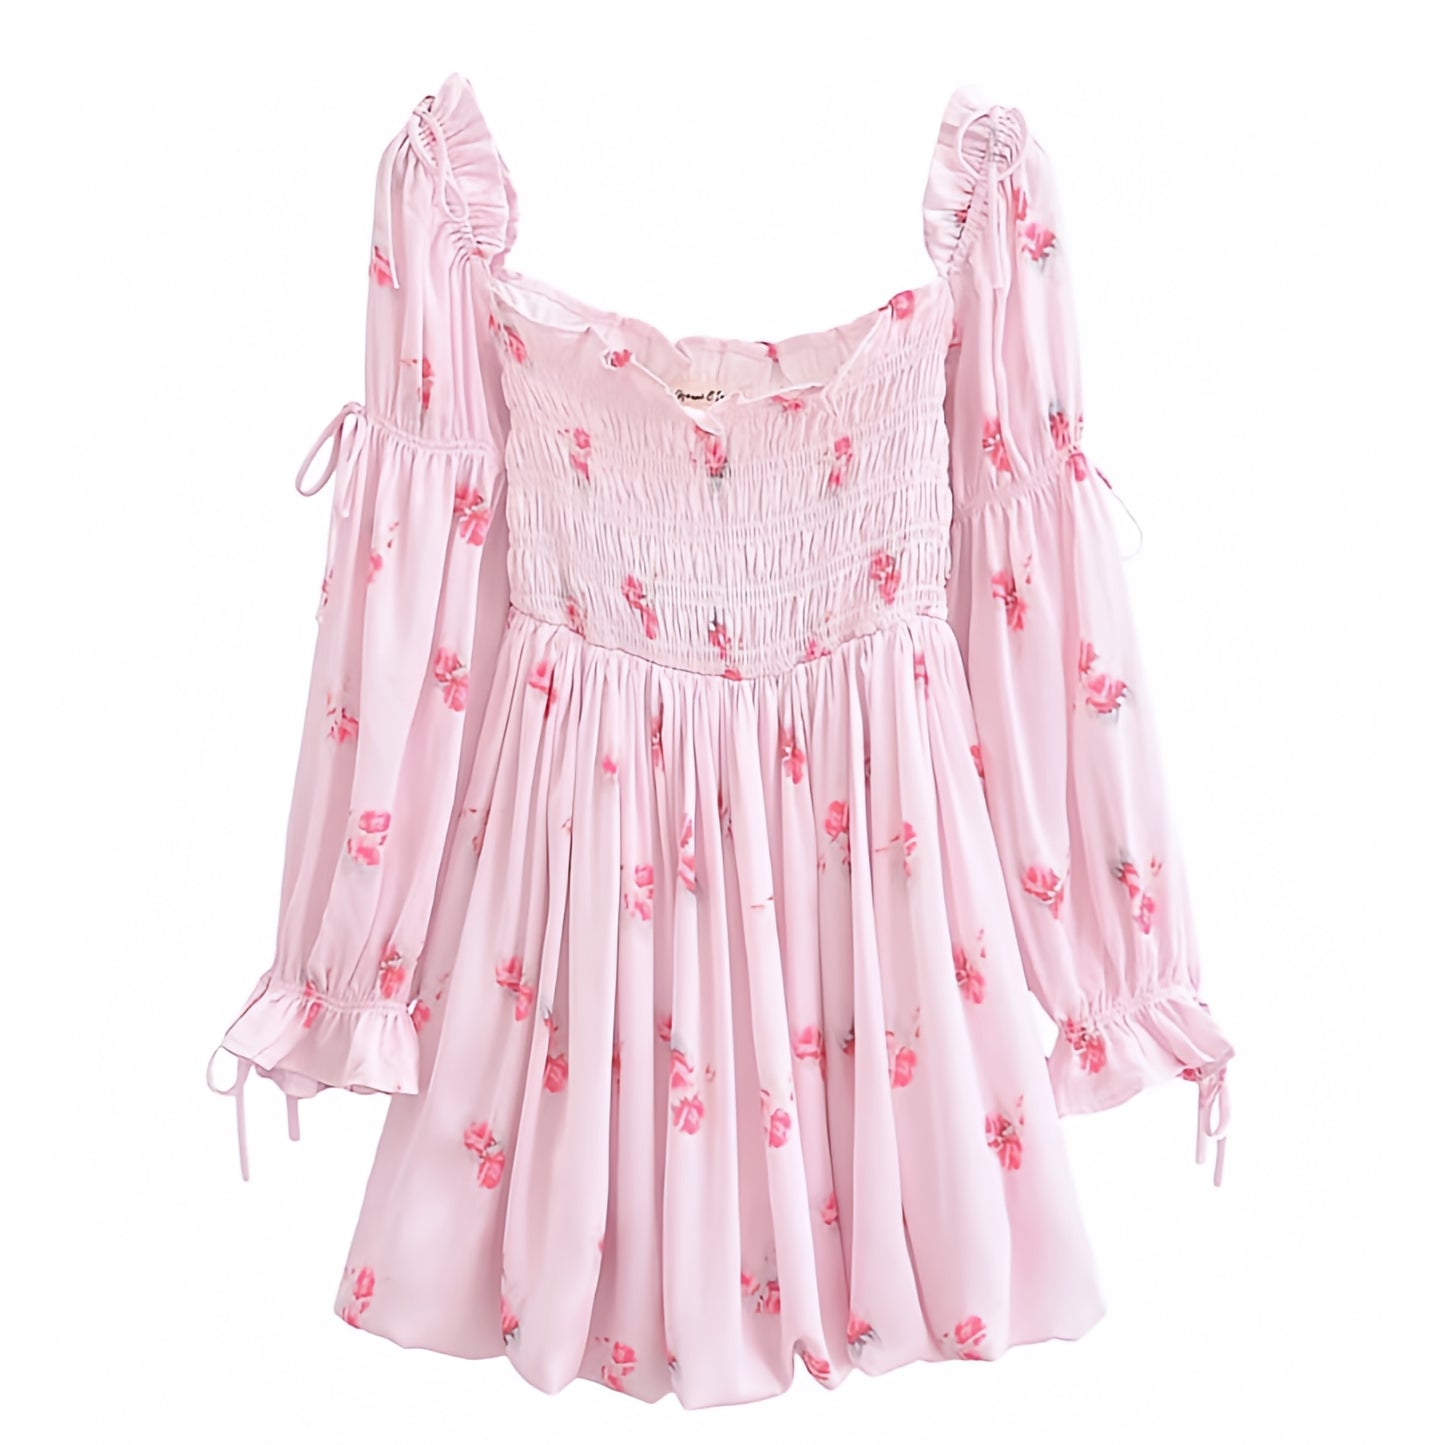 floral-print-light-pink-multi-color-flower-patterned-slim-smocked-bodycon-fitted-bodice-drop-waist-ruffle-trim-fit-and-flare-long-puff-sleeve-sweetheart-neckline-tiered-boho-bohemian-flowy-linen-short-mini-dress-gown-women-ladies-teens-tweens-chic-trendy-spring-2024-summer-elegant-casual-semi-formal-feminine-preppy-style-prom-homecoming-hoco-wedding-guest-party-graduation-beach-vacation-sundress-dresses-altard-state-loveshackfancy-revolve-lulus-hello-molly-dupe